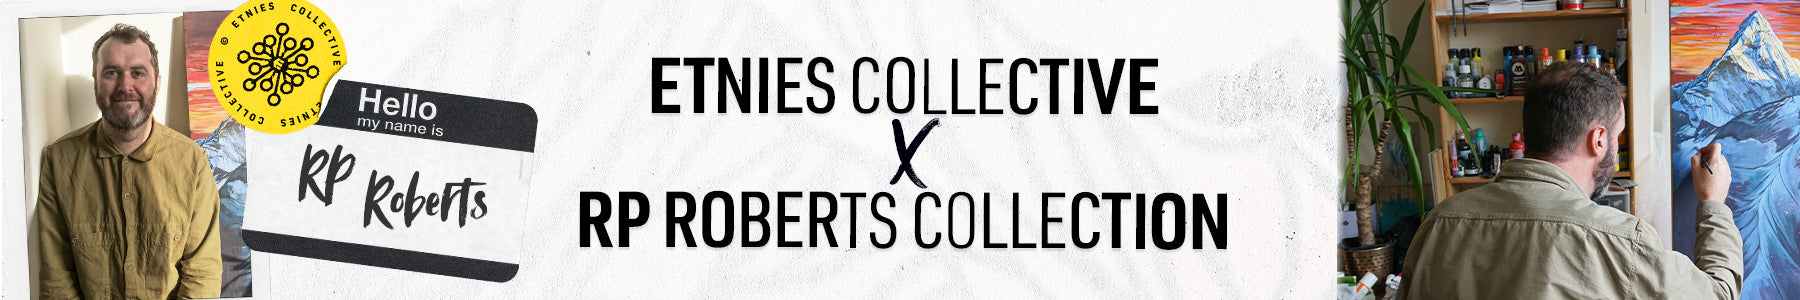 RP ROBERTS COLLECTION